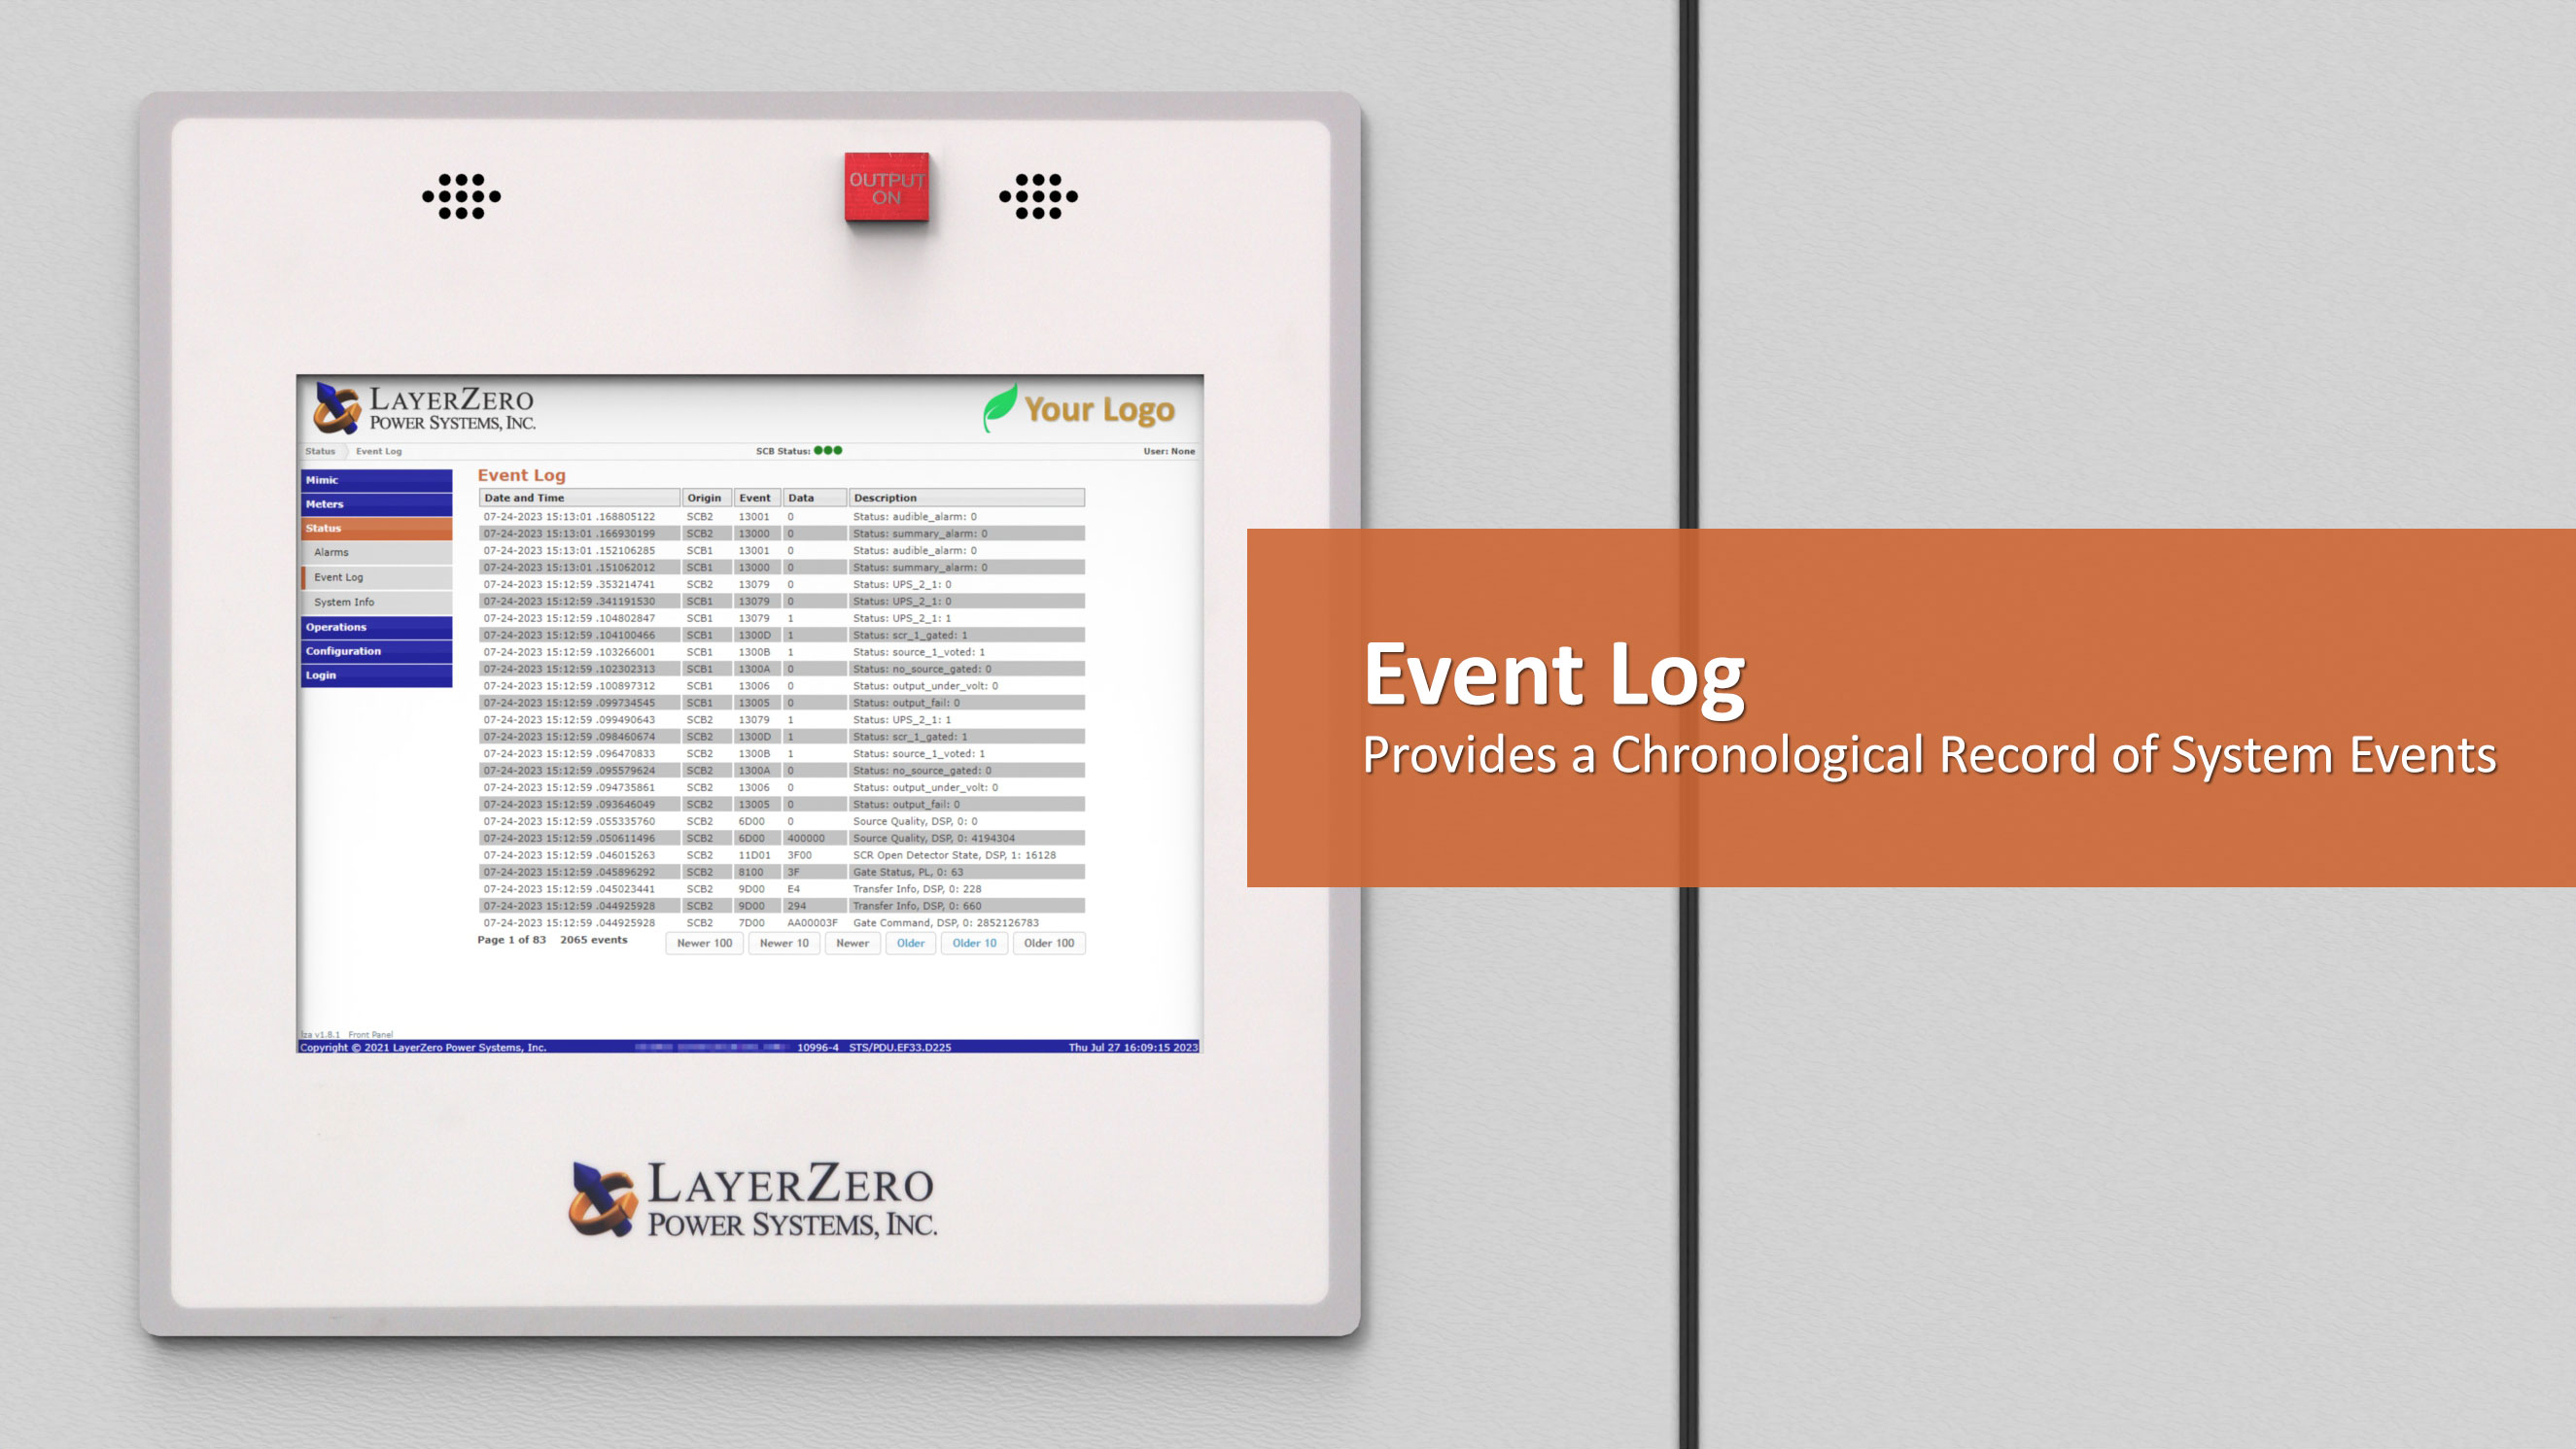 Event Log Screen in the LayerZero eSTS Static Transfer Switch